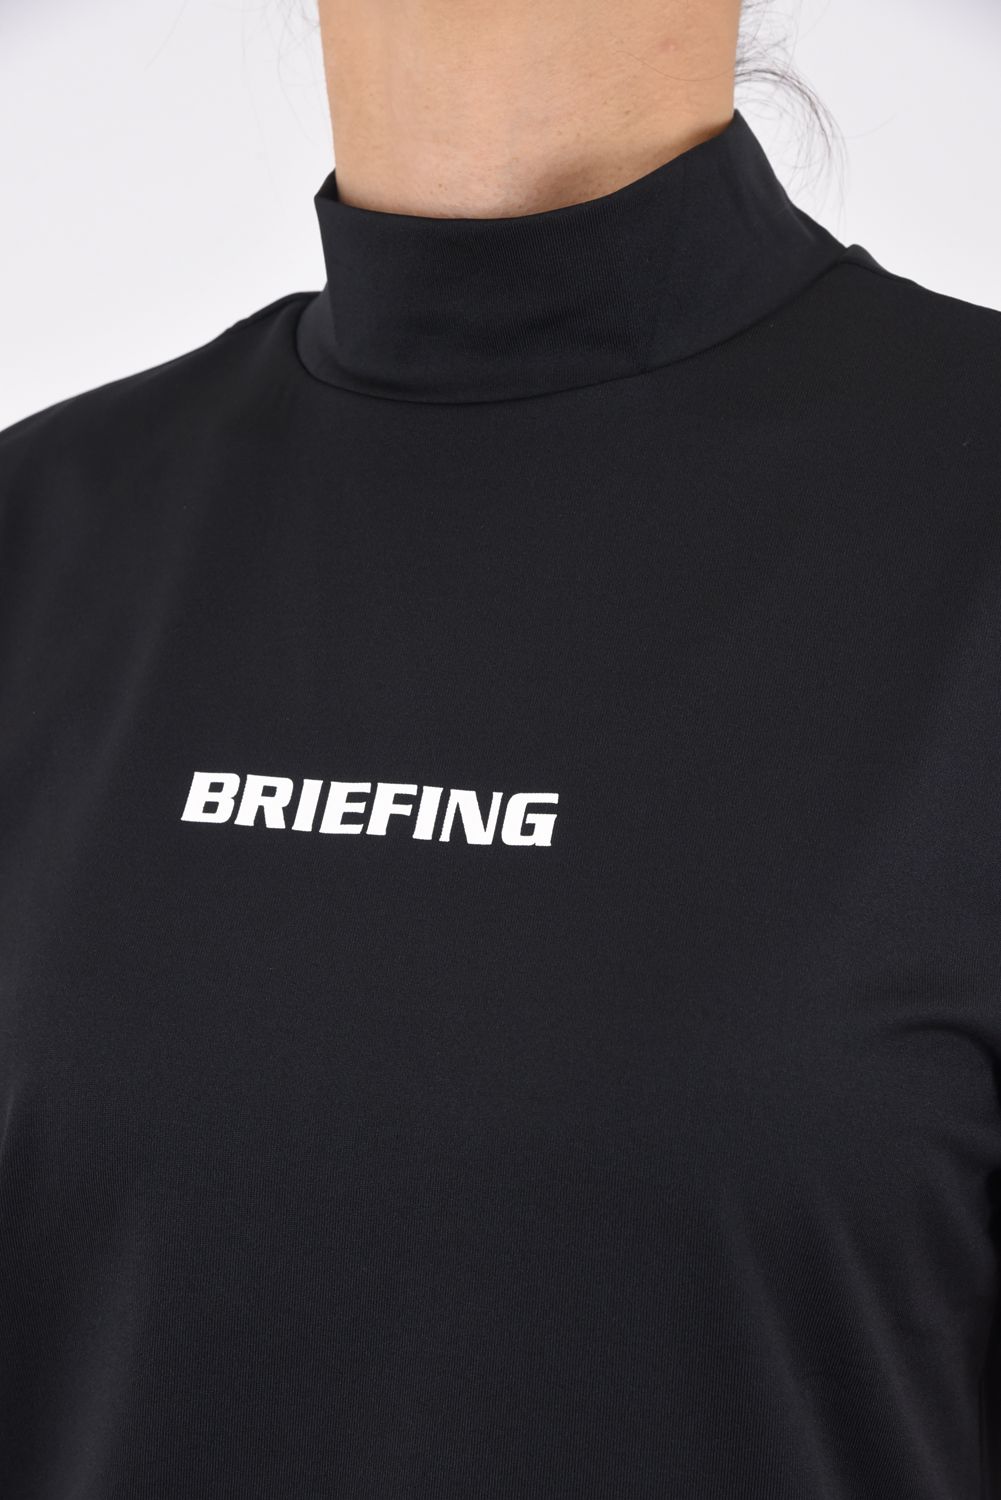 BRIEFING - WOMENS TOUR HIGH NECK / BRIEFINGロゴ ハイネックシャツ